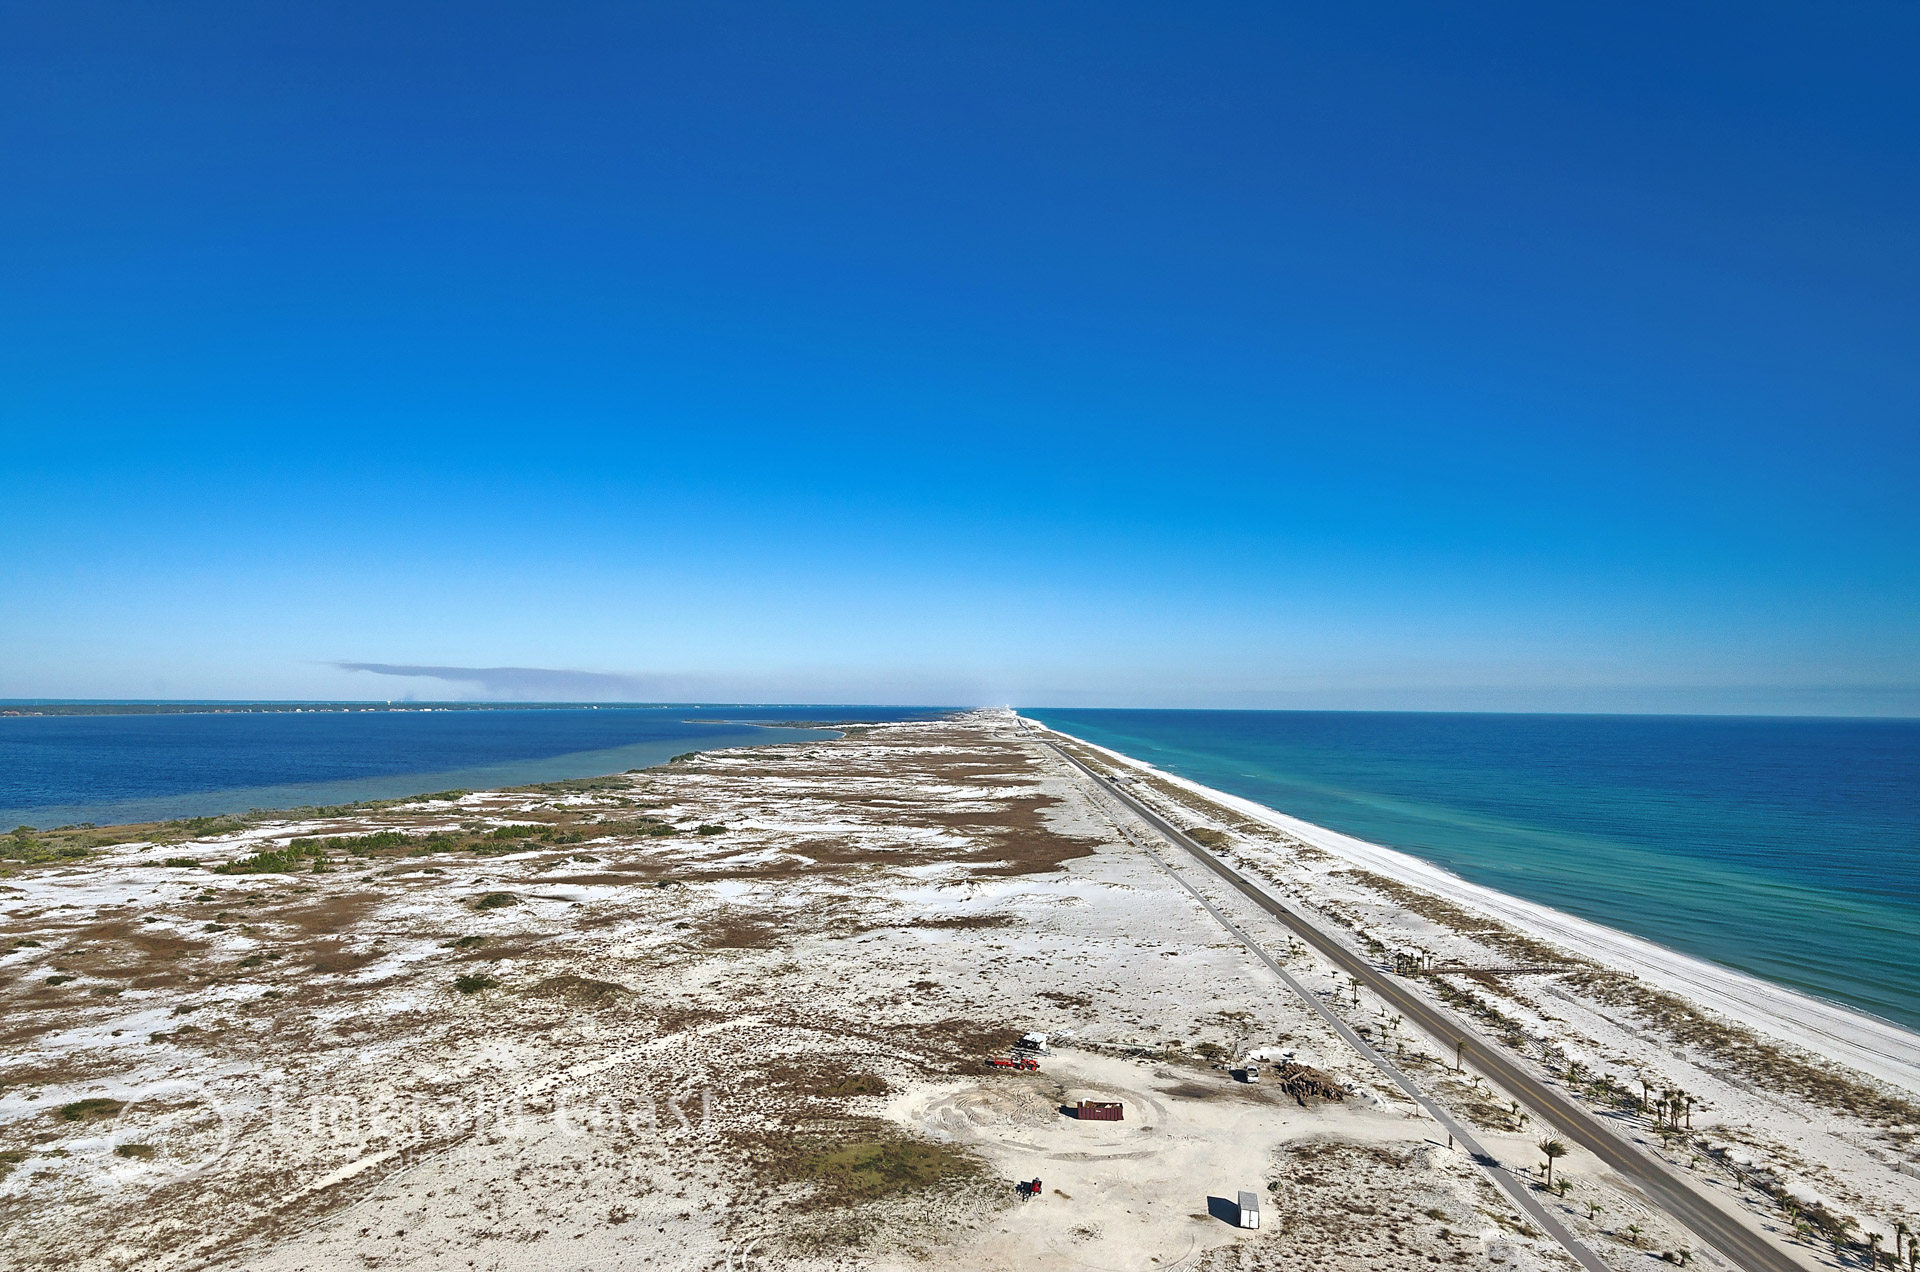 View of the National Seashore and Gulf of Mexico